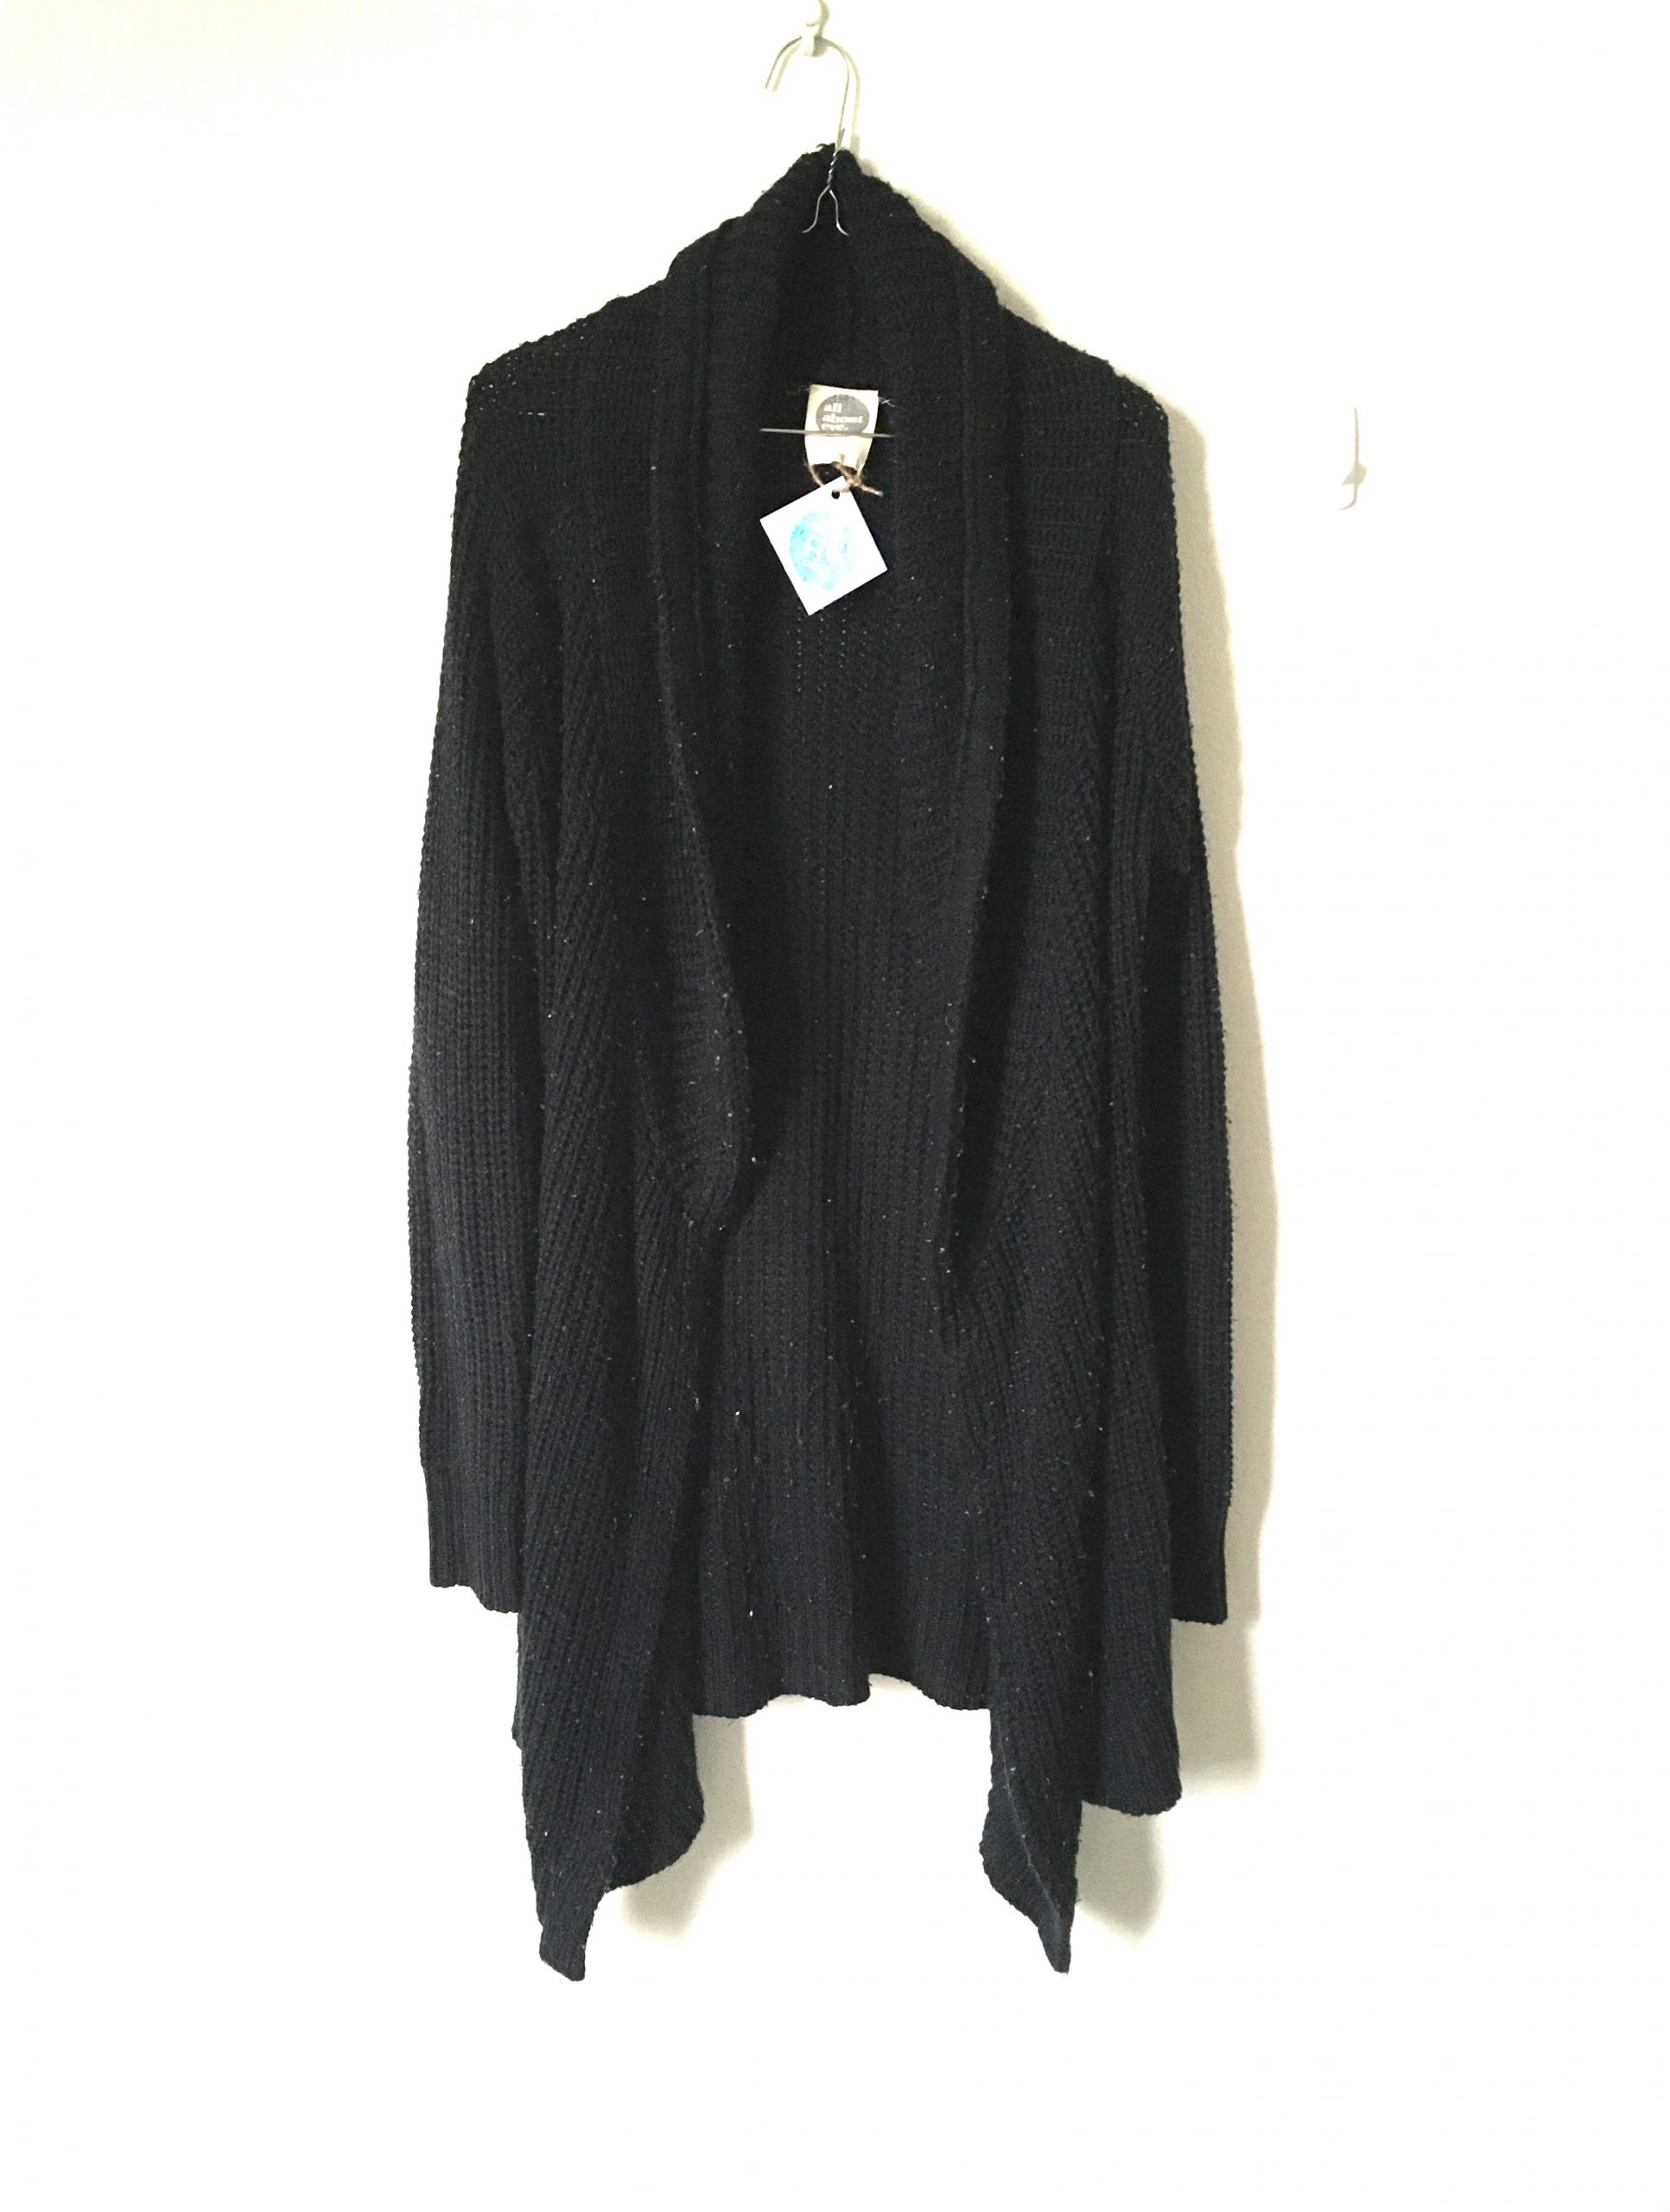 IMPERFECT All About Eve Black Long Chunky Knit Cardi - The Re: Club